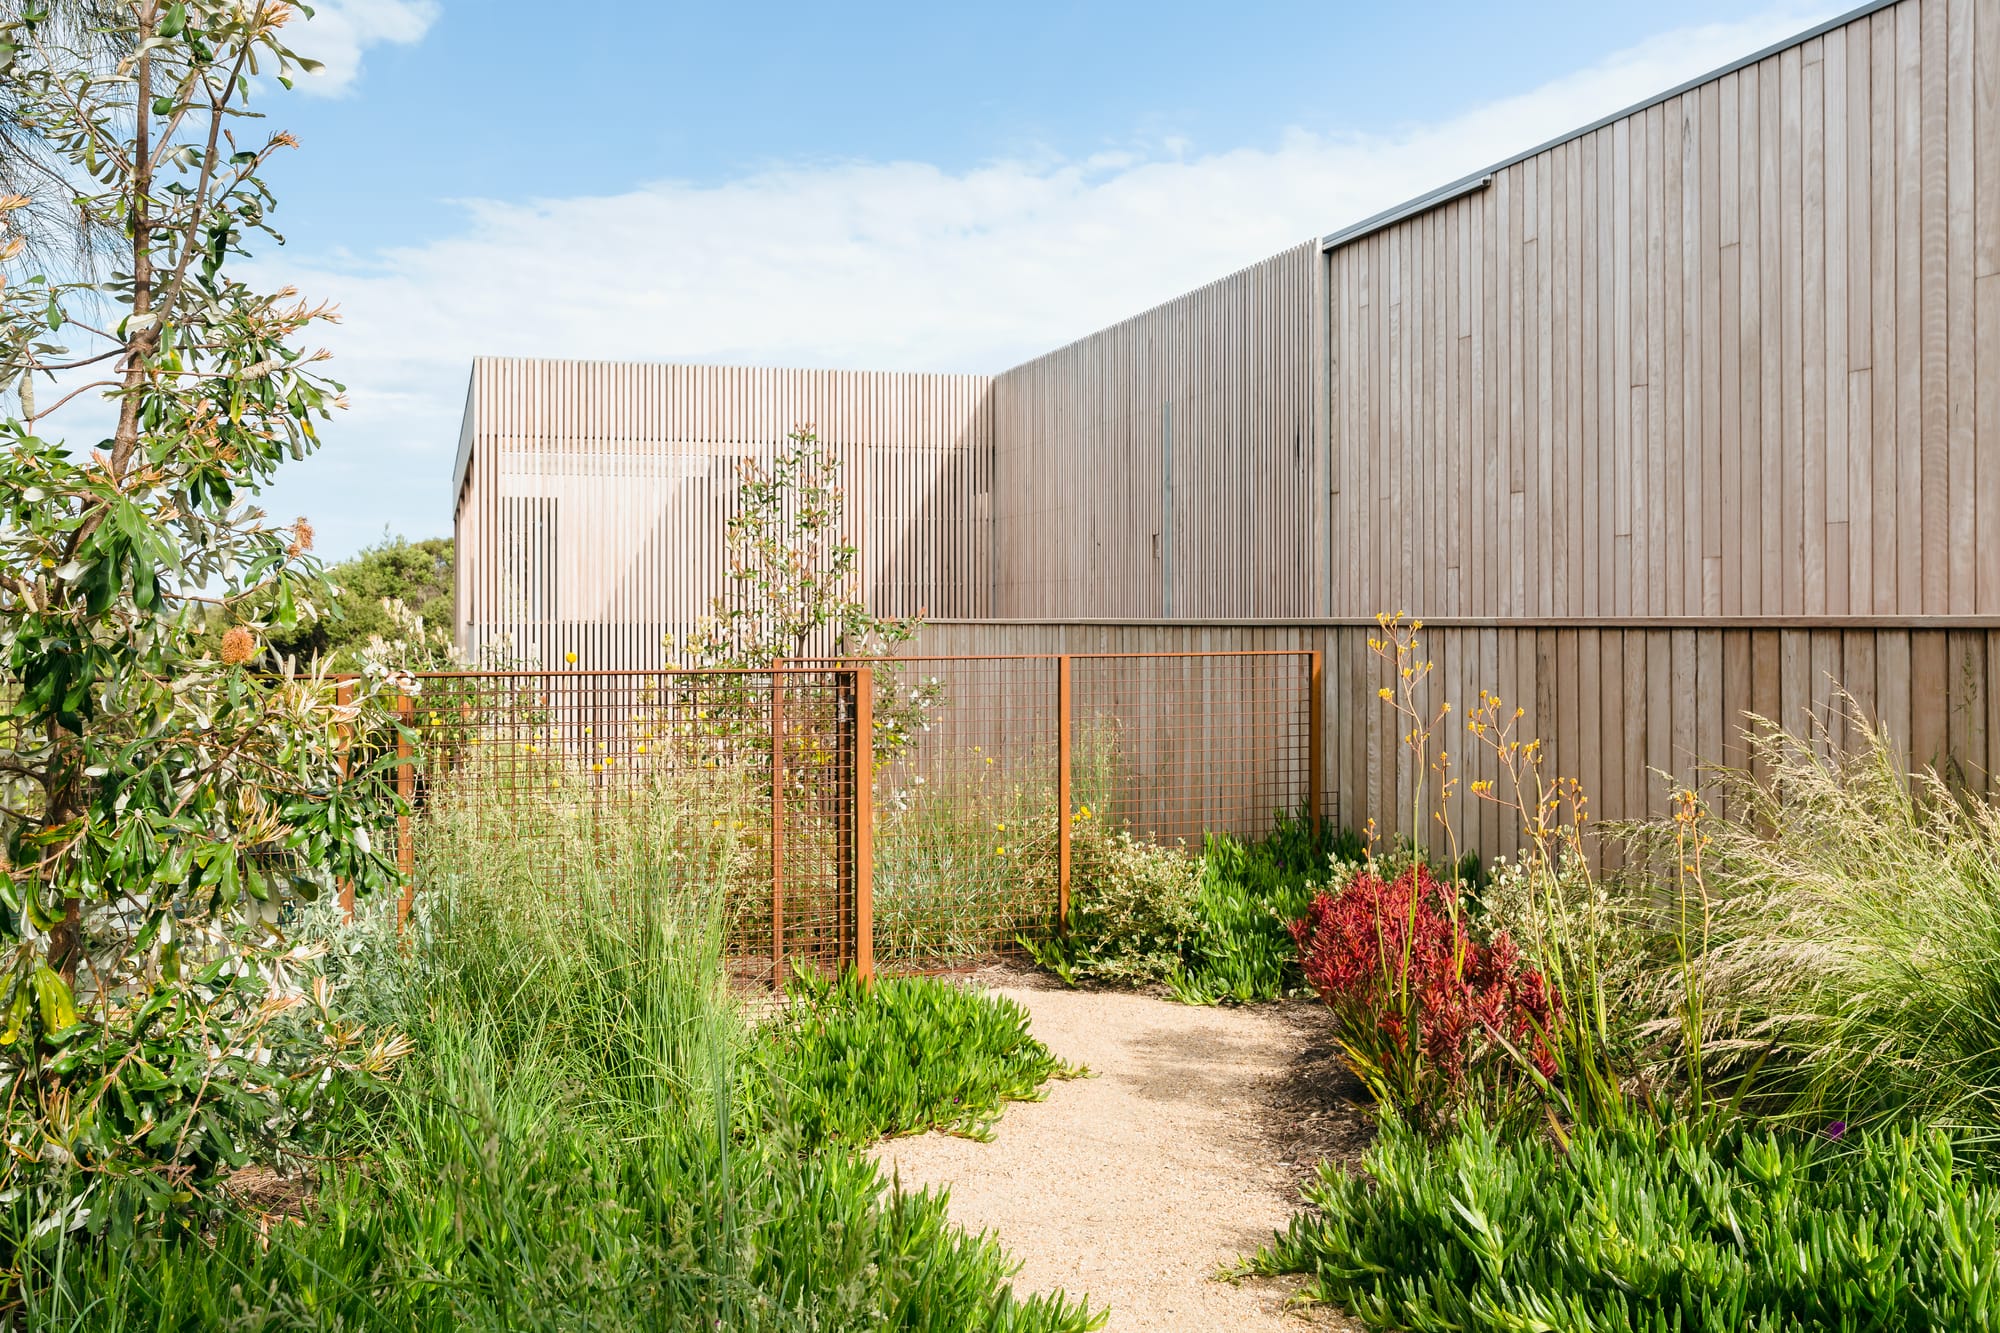 Ritchie Blairgowrie by Julie Crowe Landscape Design. Photography by Erik Holt Photography.  Double storey timber clad home in background. Crushed limestone path surrounded by native Australian garden in foreground. Rusted fence between home and garden. 